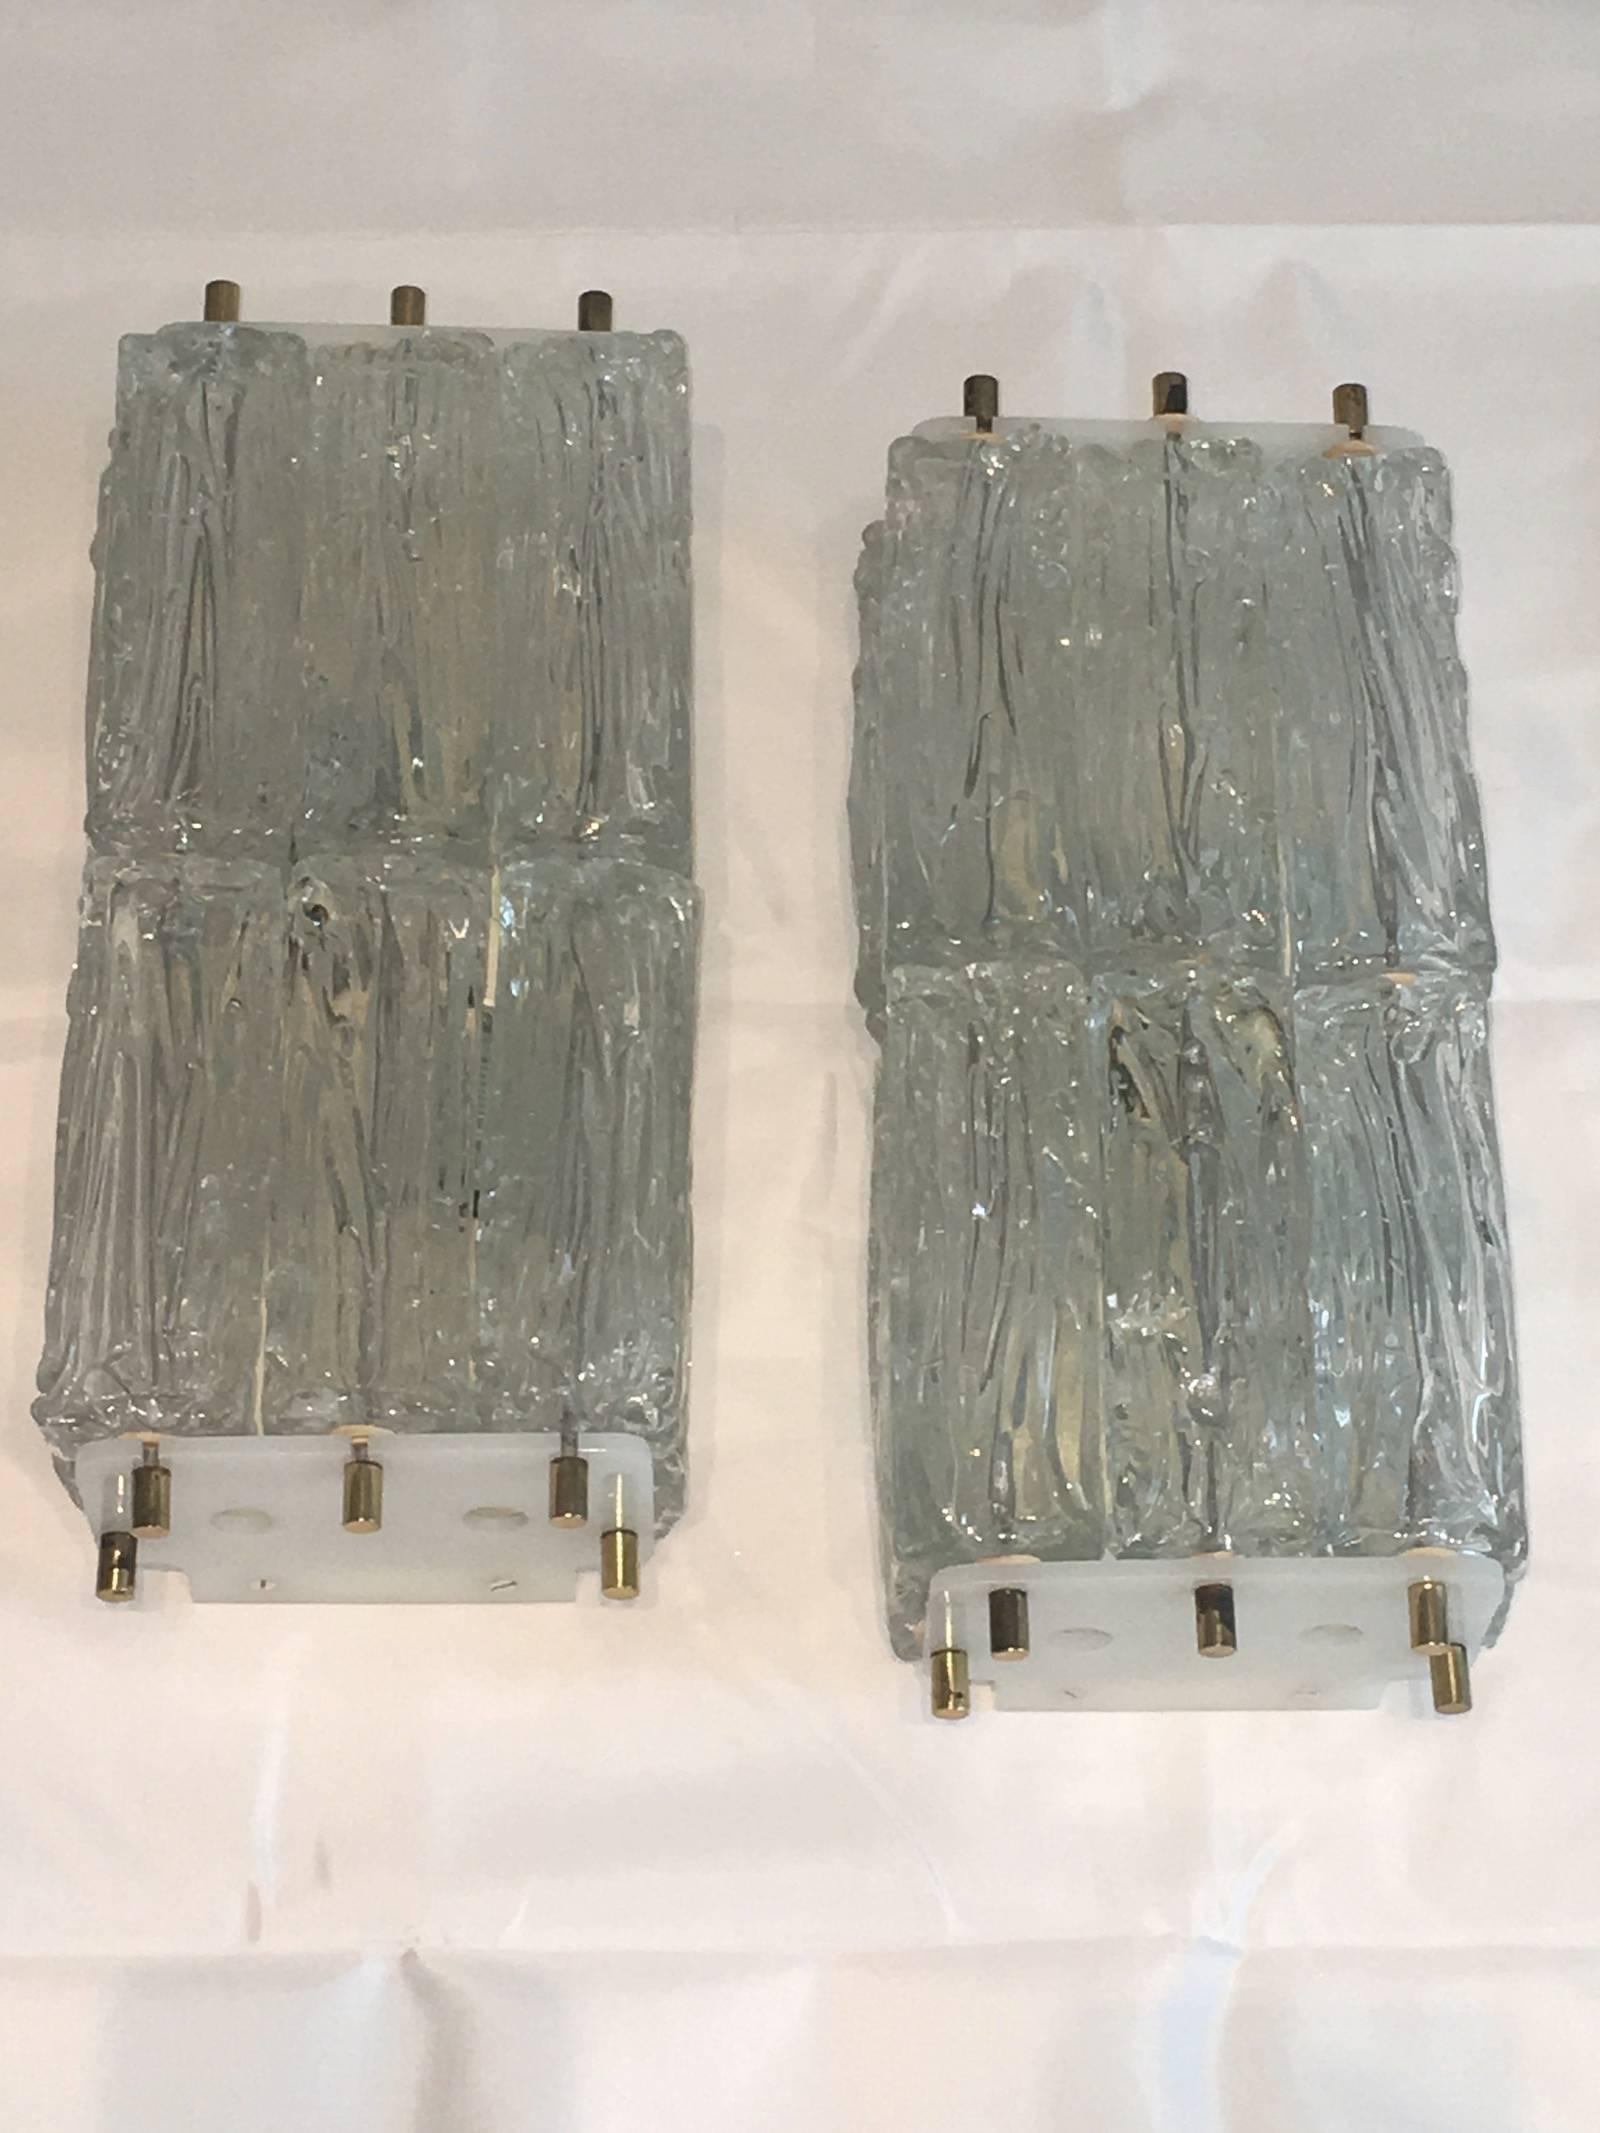 A pair of wall sconces, produced circa 1970s in the style of Venini, with rows of textured glass ice blocks as shades, each stack of three affixed to plastic mounts by brass heads, surrounding two sockets, against an enameled back plate. Overall